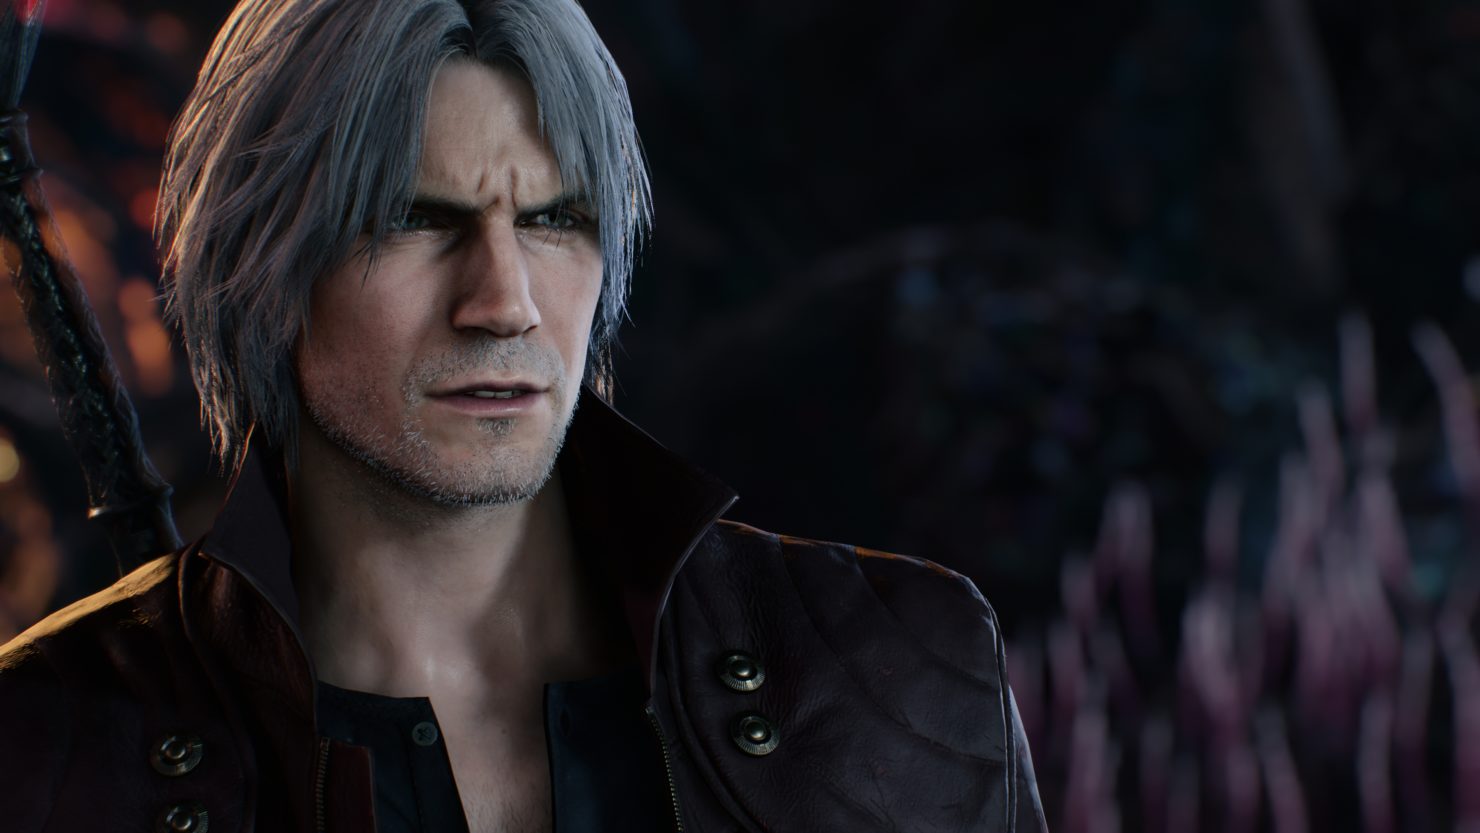 Image for Apologies, but Dante does not have cock jiggle physics in Devil May Cry 5